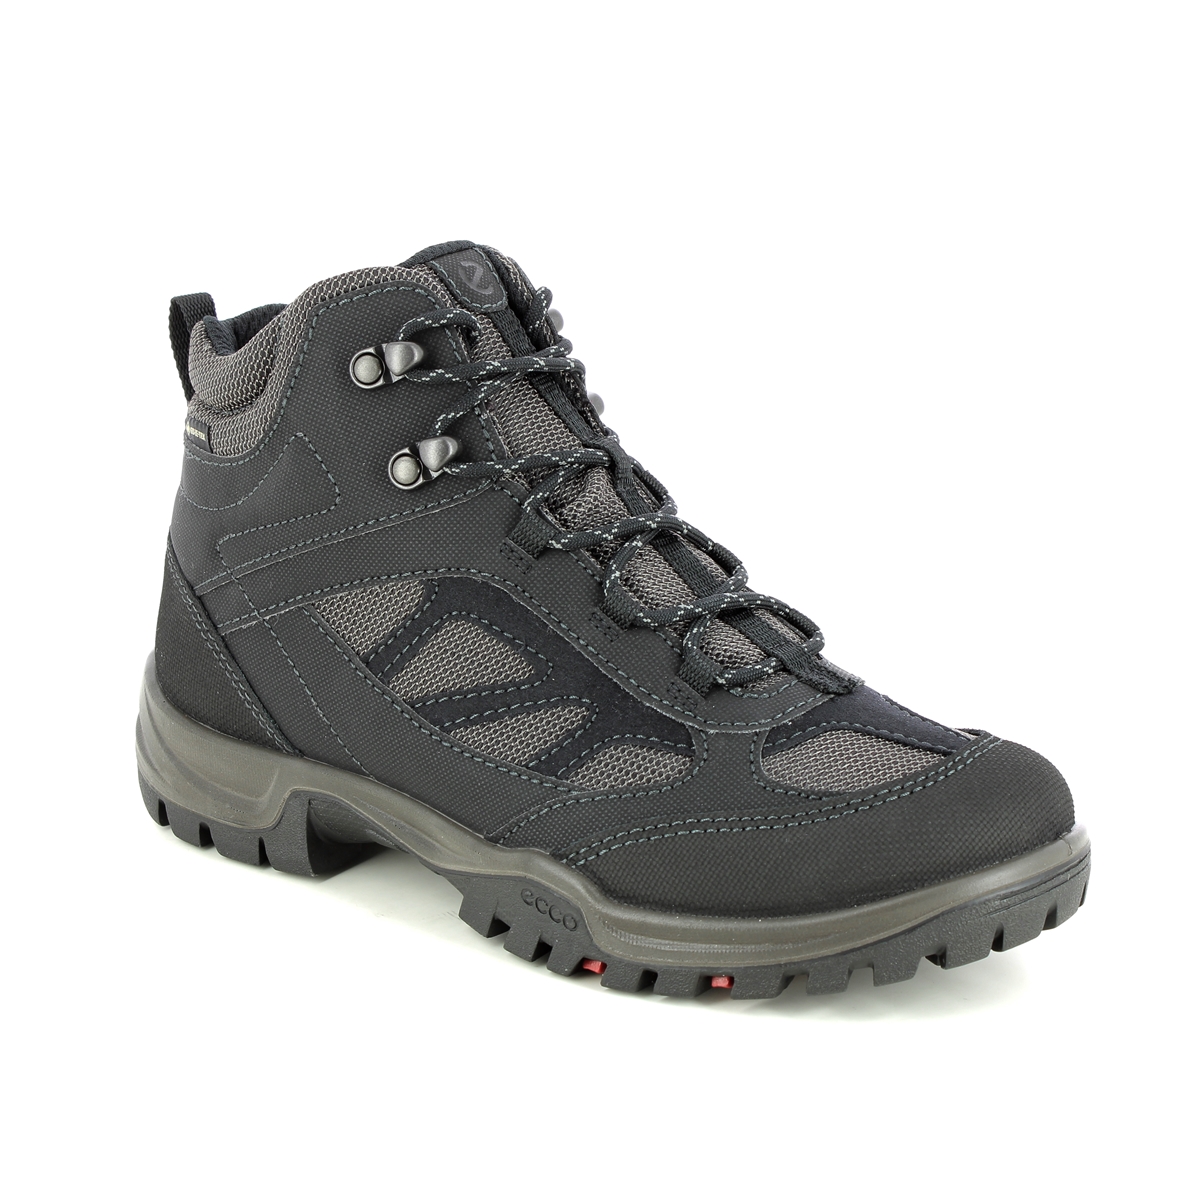 Ecco Xpedition W Mid Gtx Black Womens Walking Boots 811273-51526 In Size 38 In Plain Black